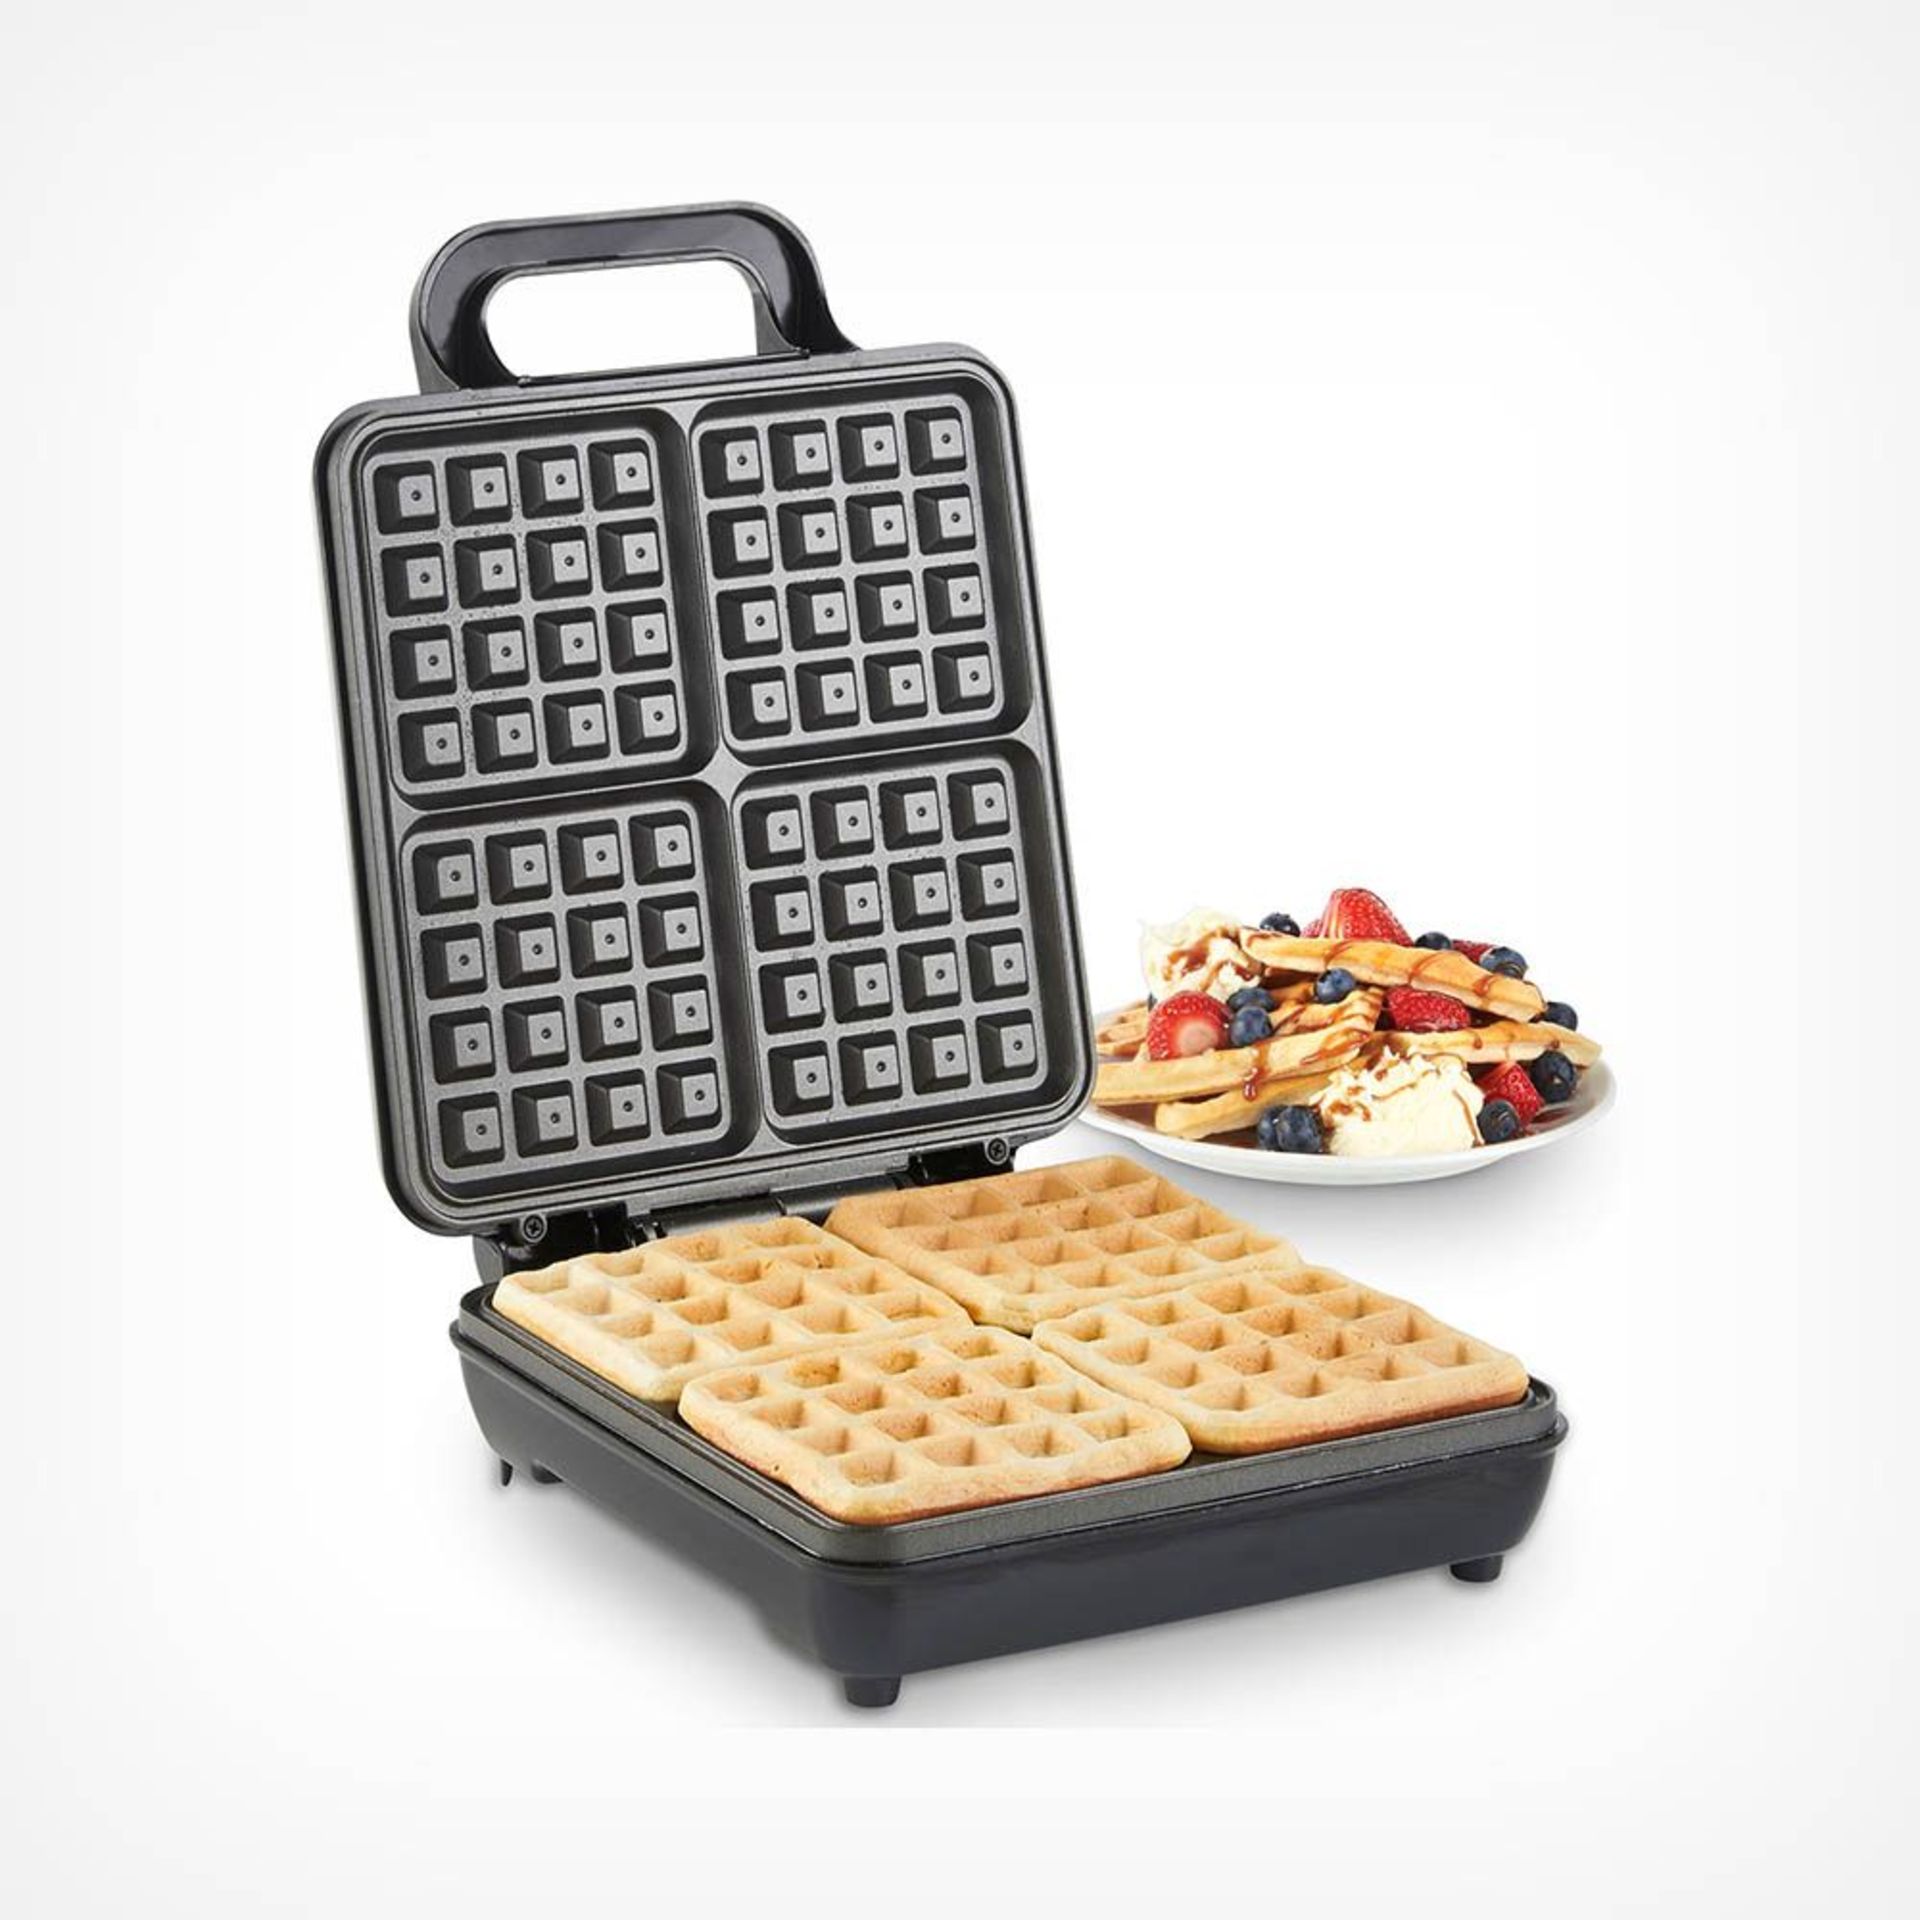 Quad Waffle Maker. -INSL. With a non-stick coating, automatic temperature control and a quick heat